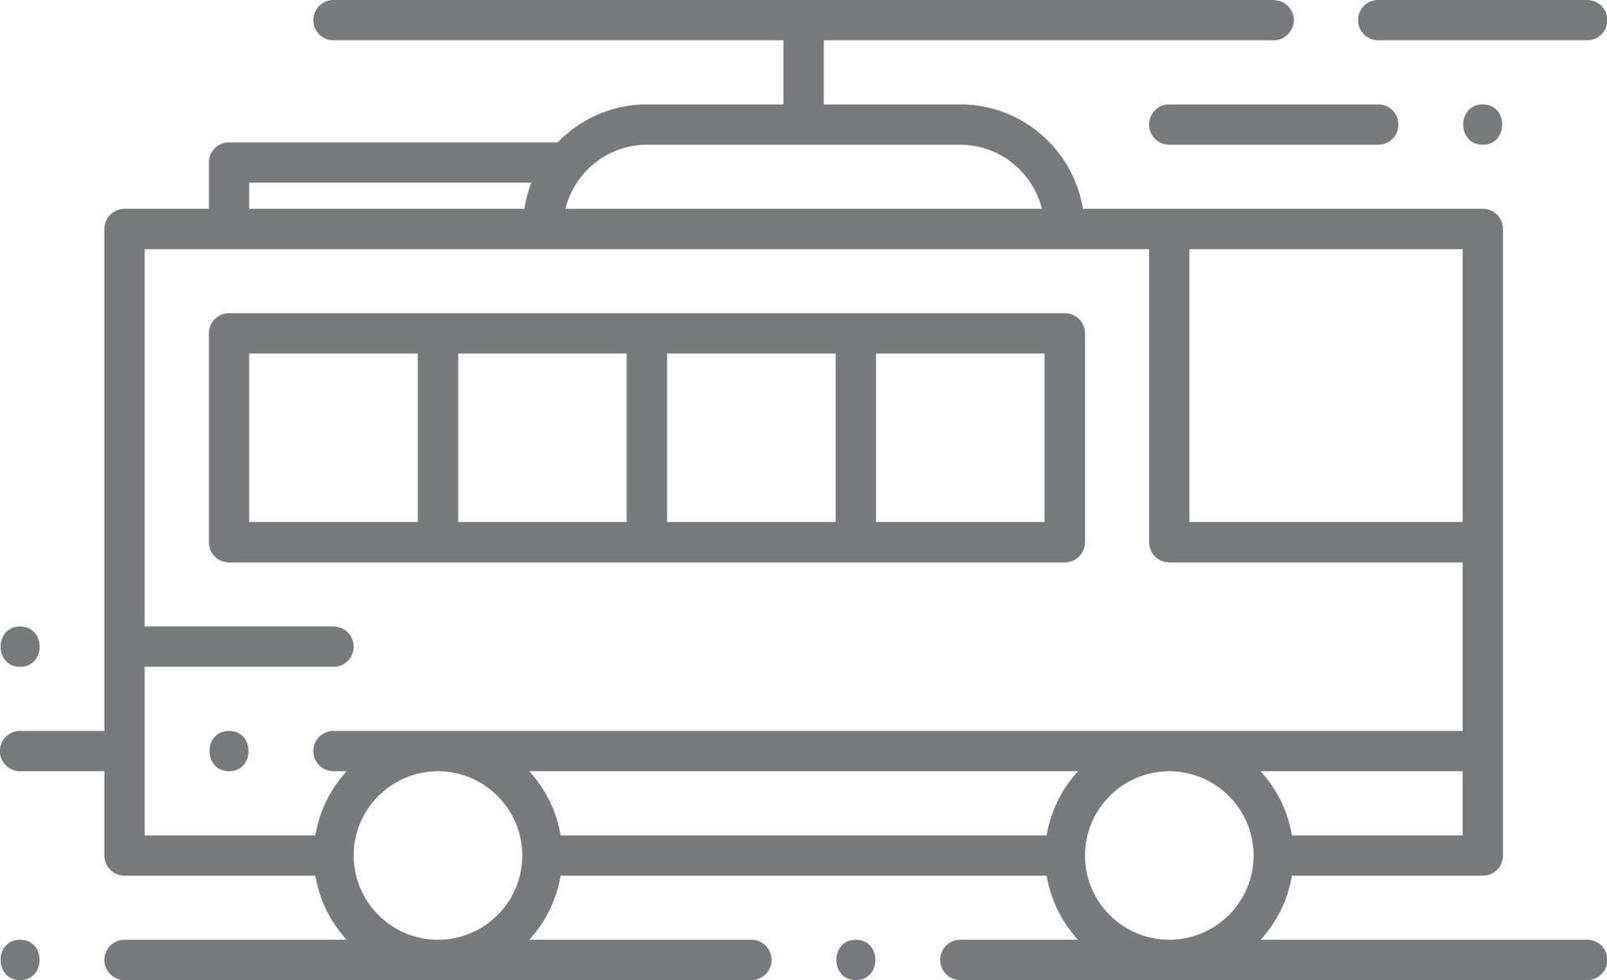 Trolleybus Transportation icon people icons with black outline style. Vehicle, symbol, transport, line, outline, travel, automobile, editable, pictogram, isolated, flat. Vector illustration